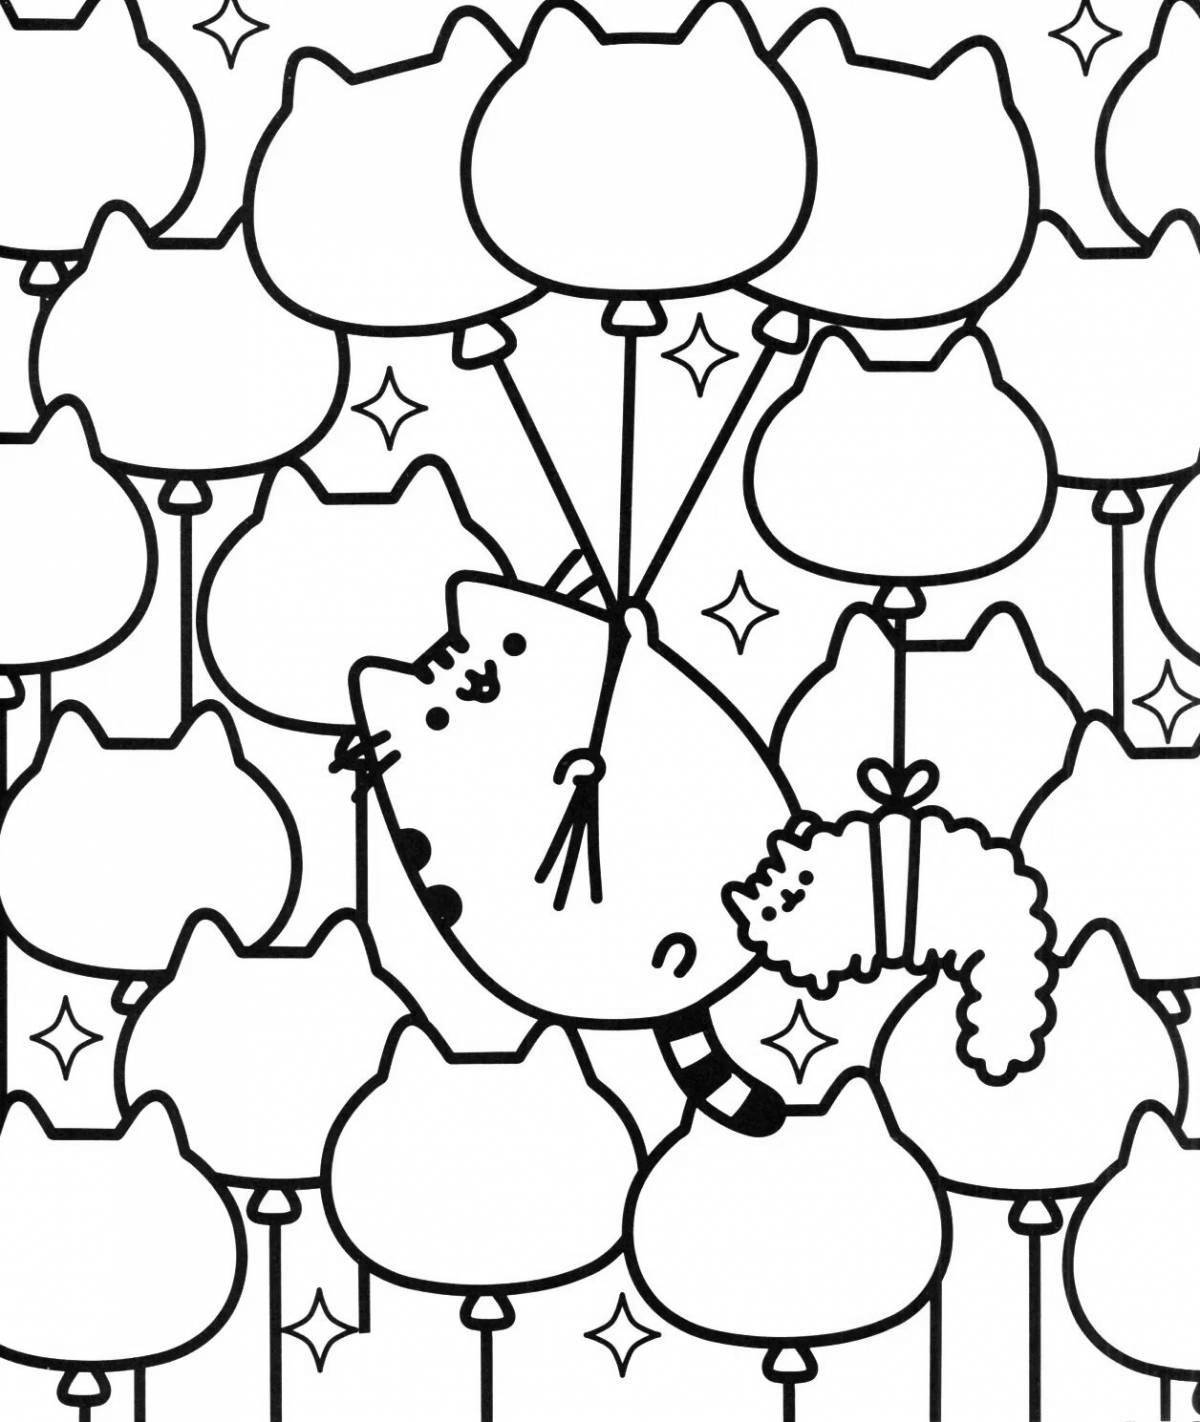 Color-frenetic coloring page many pushins